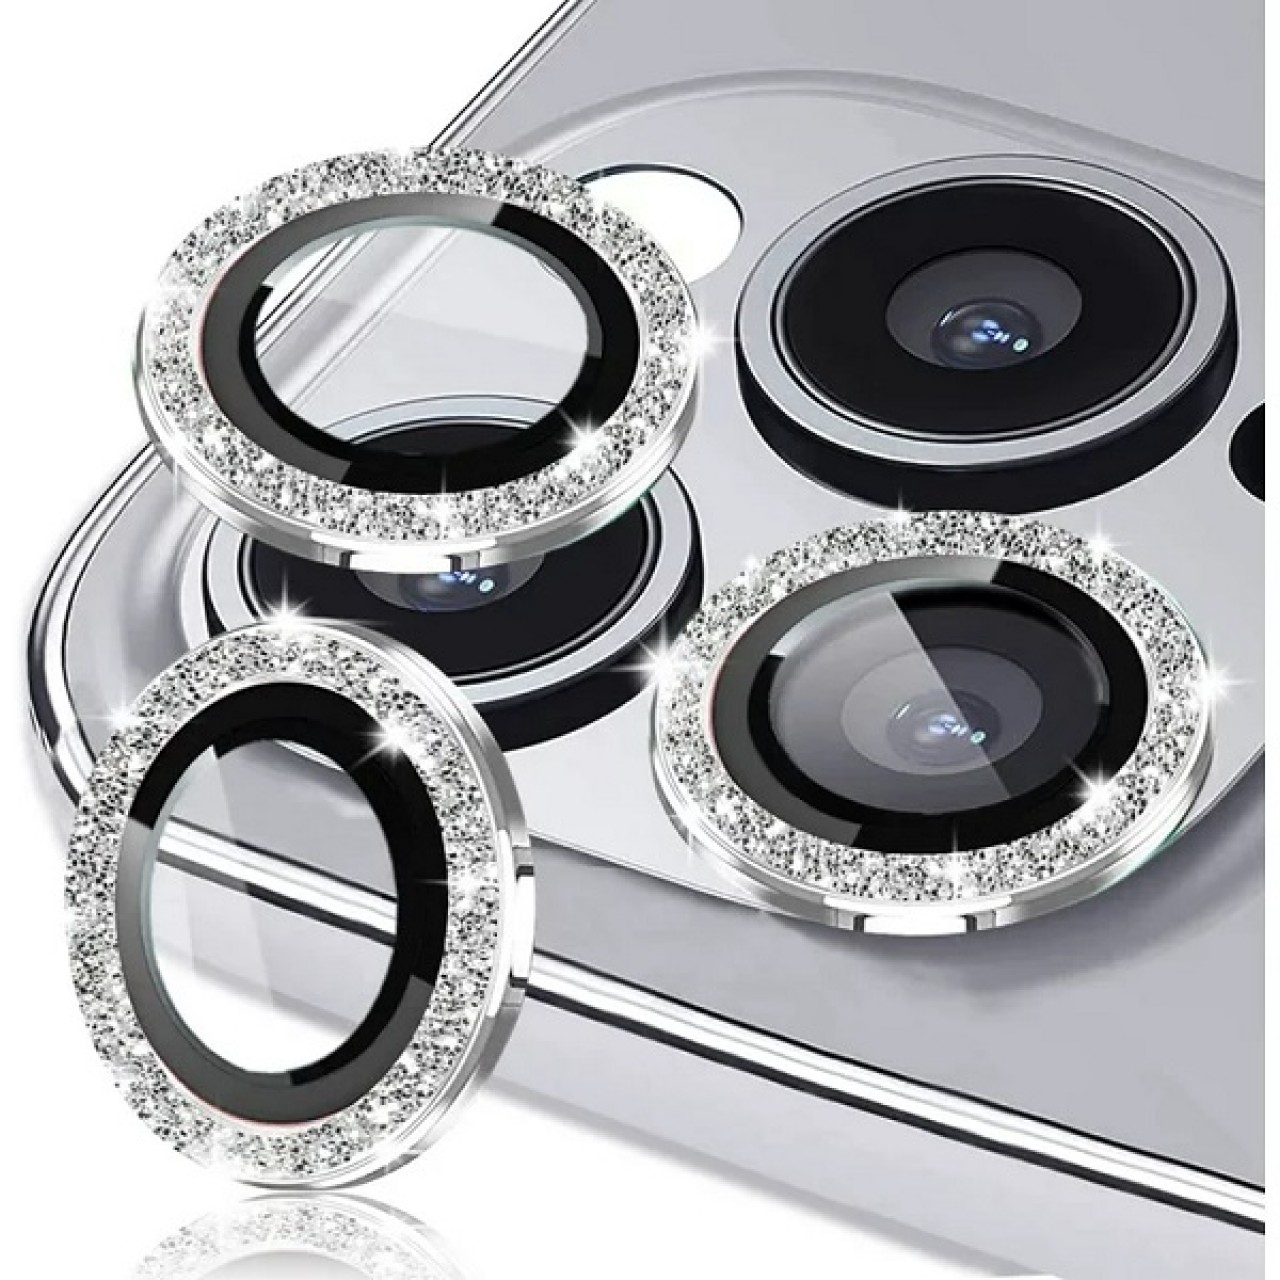 iPhone 12 Pro Max Προστασία Κάμερας Ασημί Strass - Camera Protector Ring Strass Silver